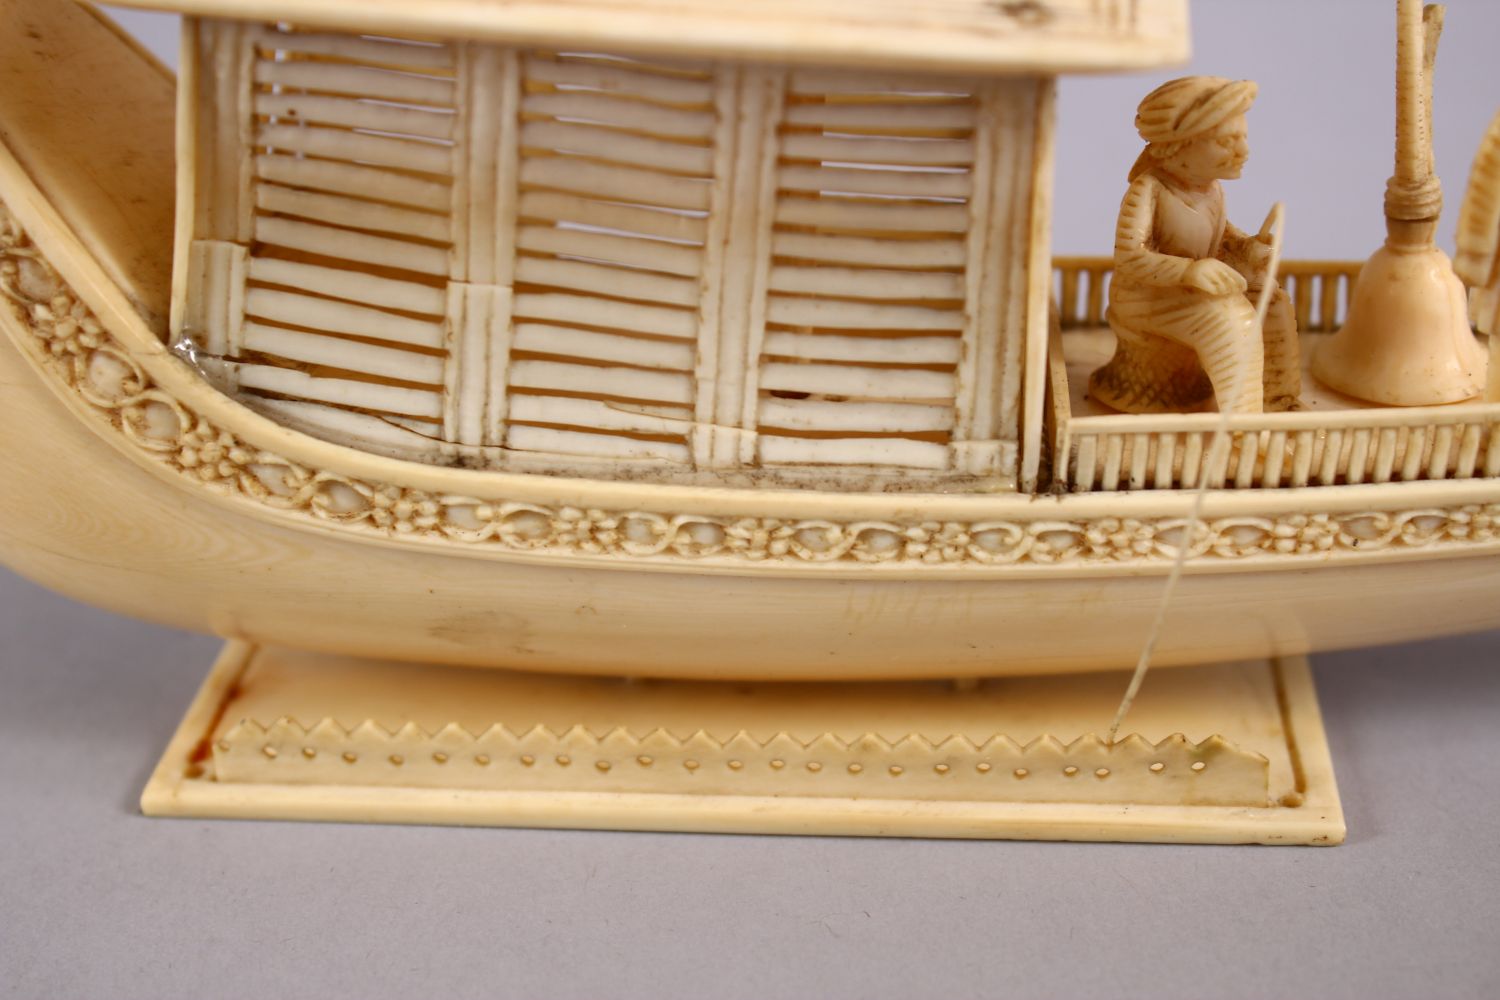 A FINELY CARVED 19TH CENTURY INDIAN IVORY BOAT WITH FISHERMEN, with fine strands of sails, six - Image 10 of 11